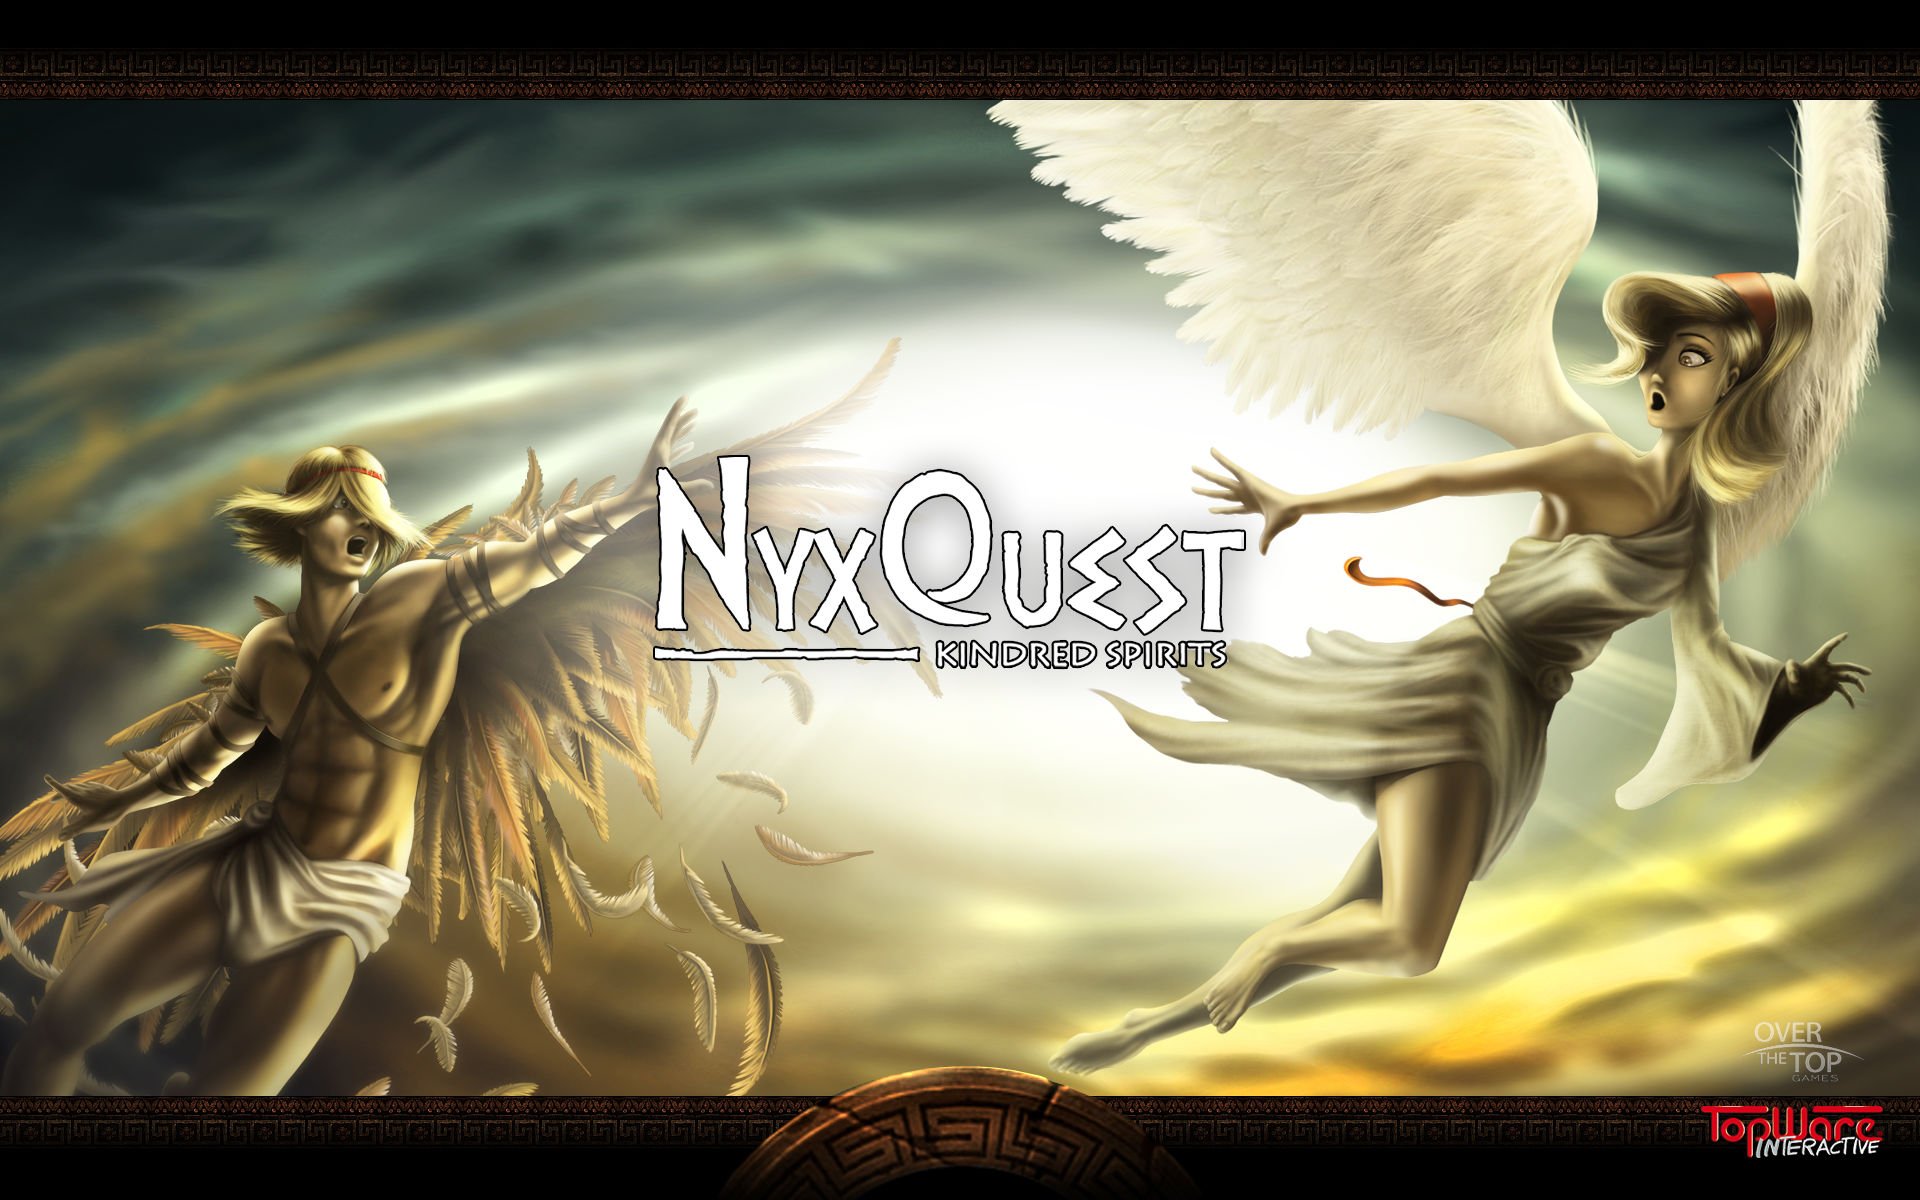 nyxquest, Platform, Fantasy, Greece, Gods, God, 1nyxquest, Icarian, Puzzle, Nintendo, Wii, Action, Nyx, Quest, Poster Wallpaper